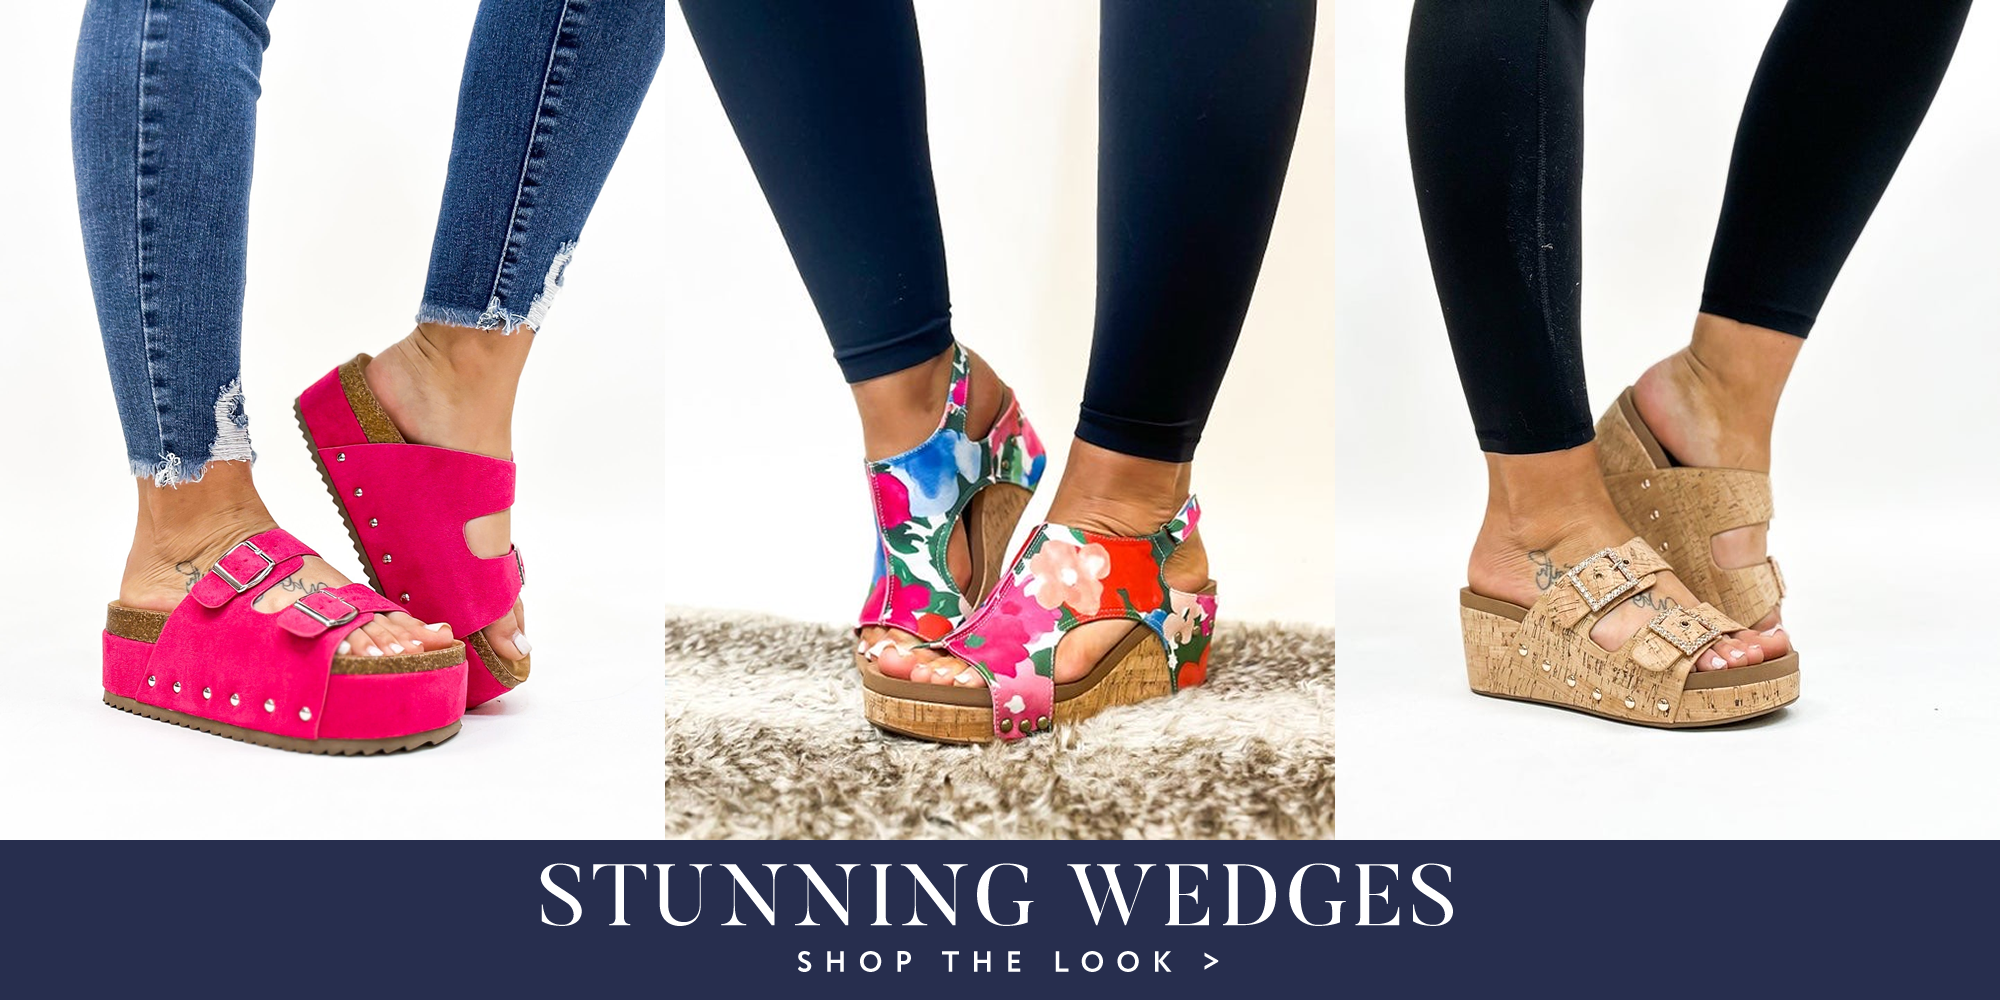 Shop wedges and heels for spring!